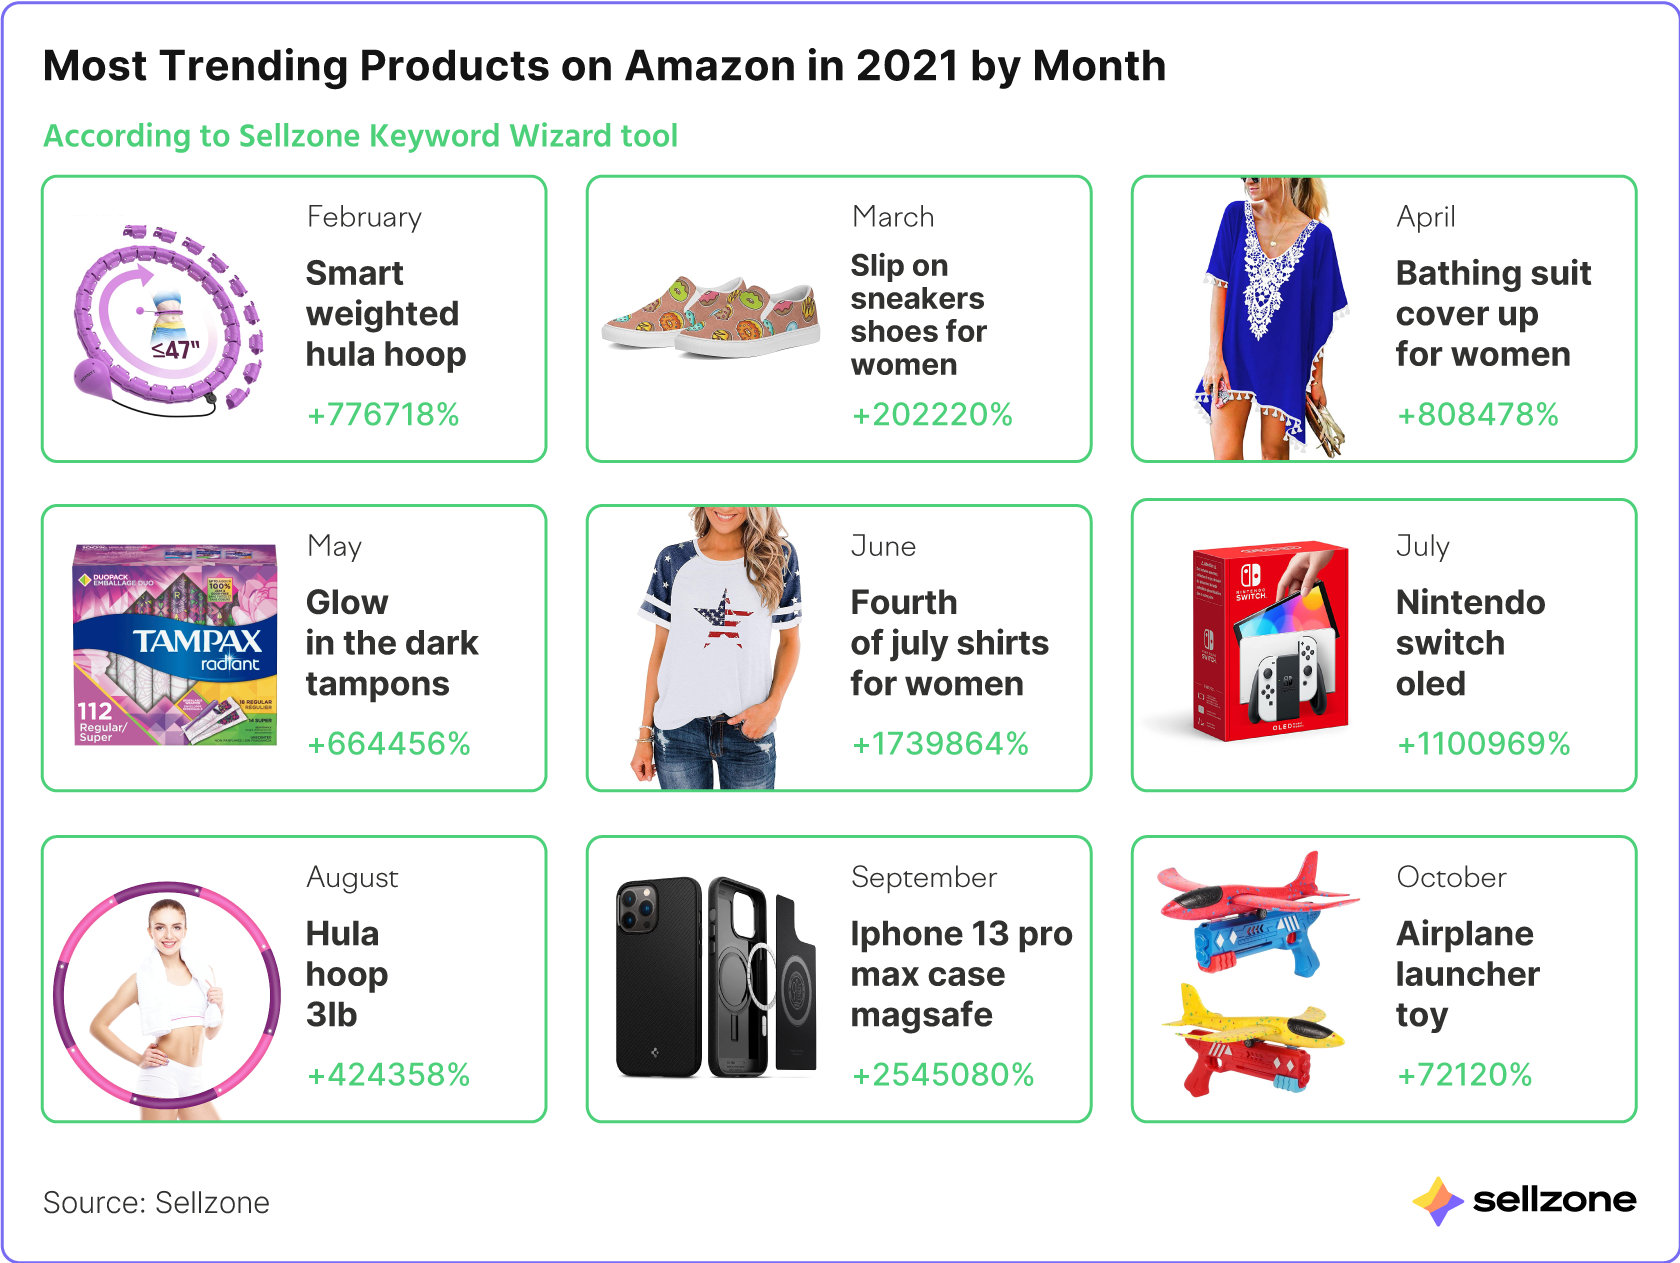 Most trending products on Amazon in 2021 by month